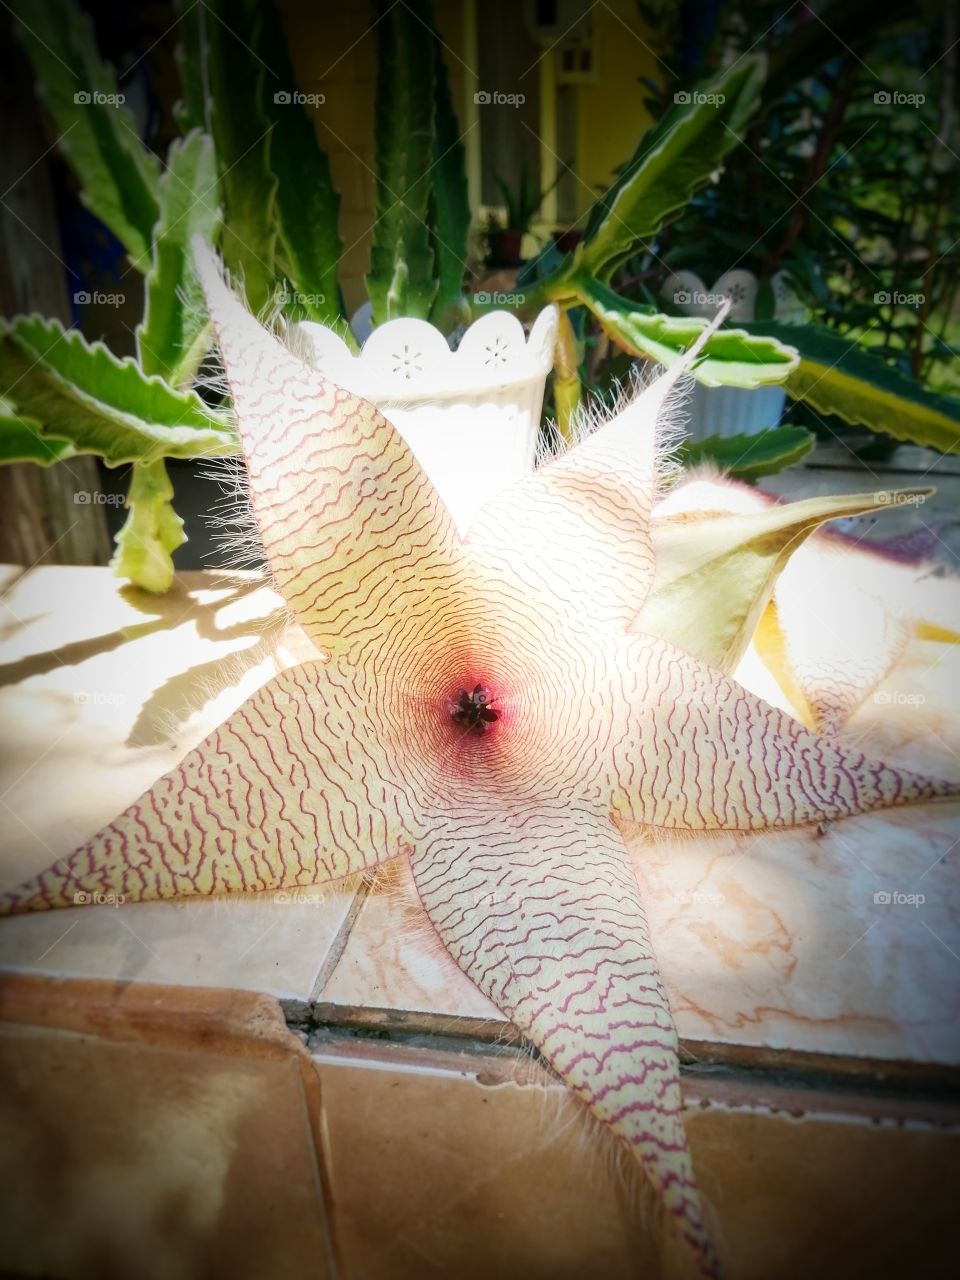 A starfish-shaped cactus flower.